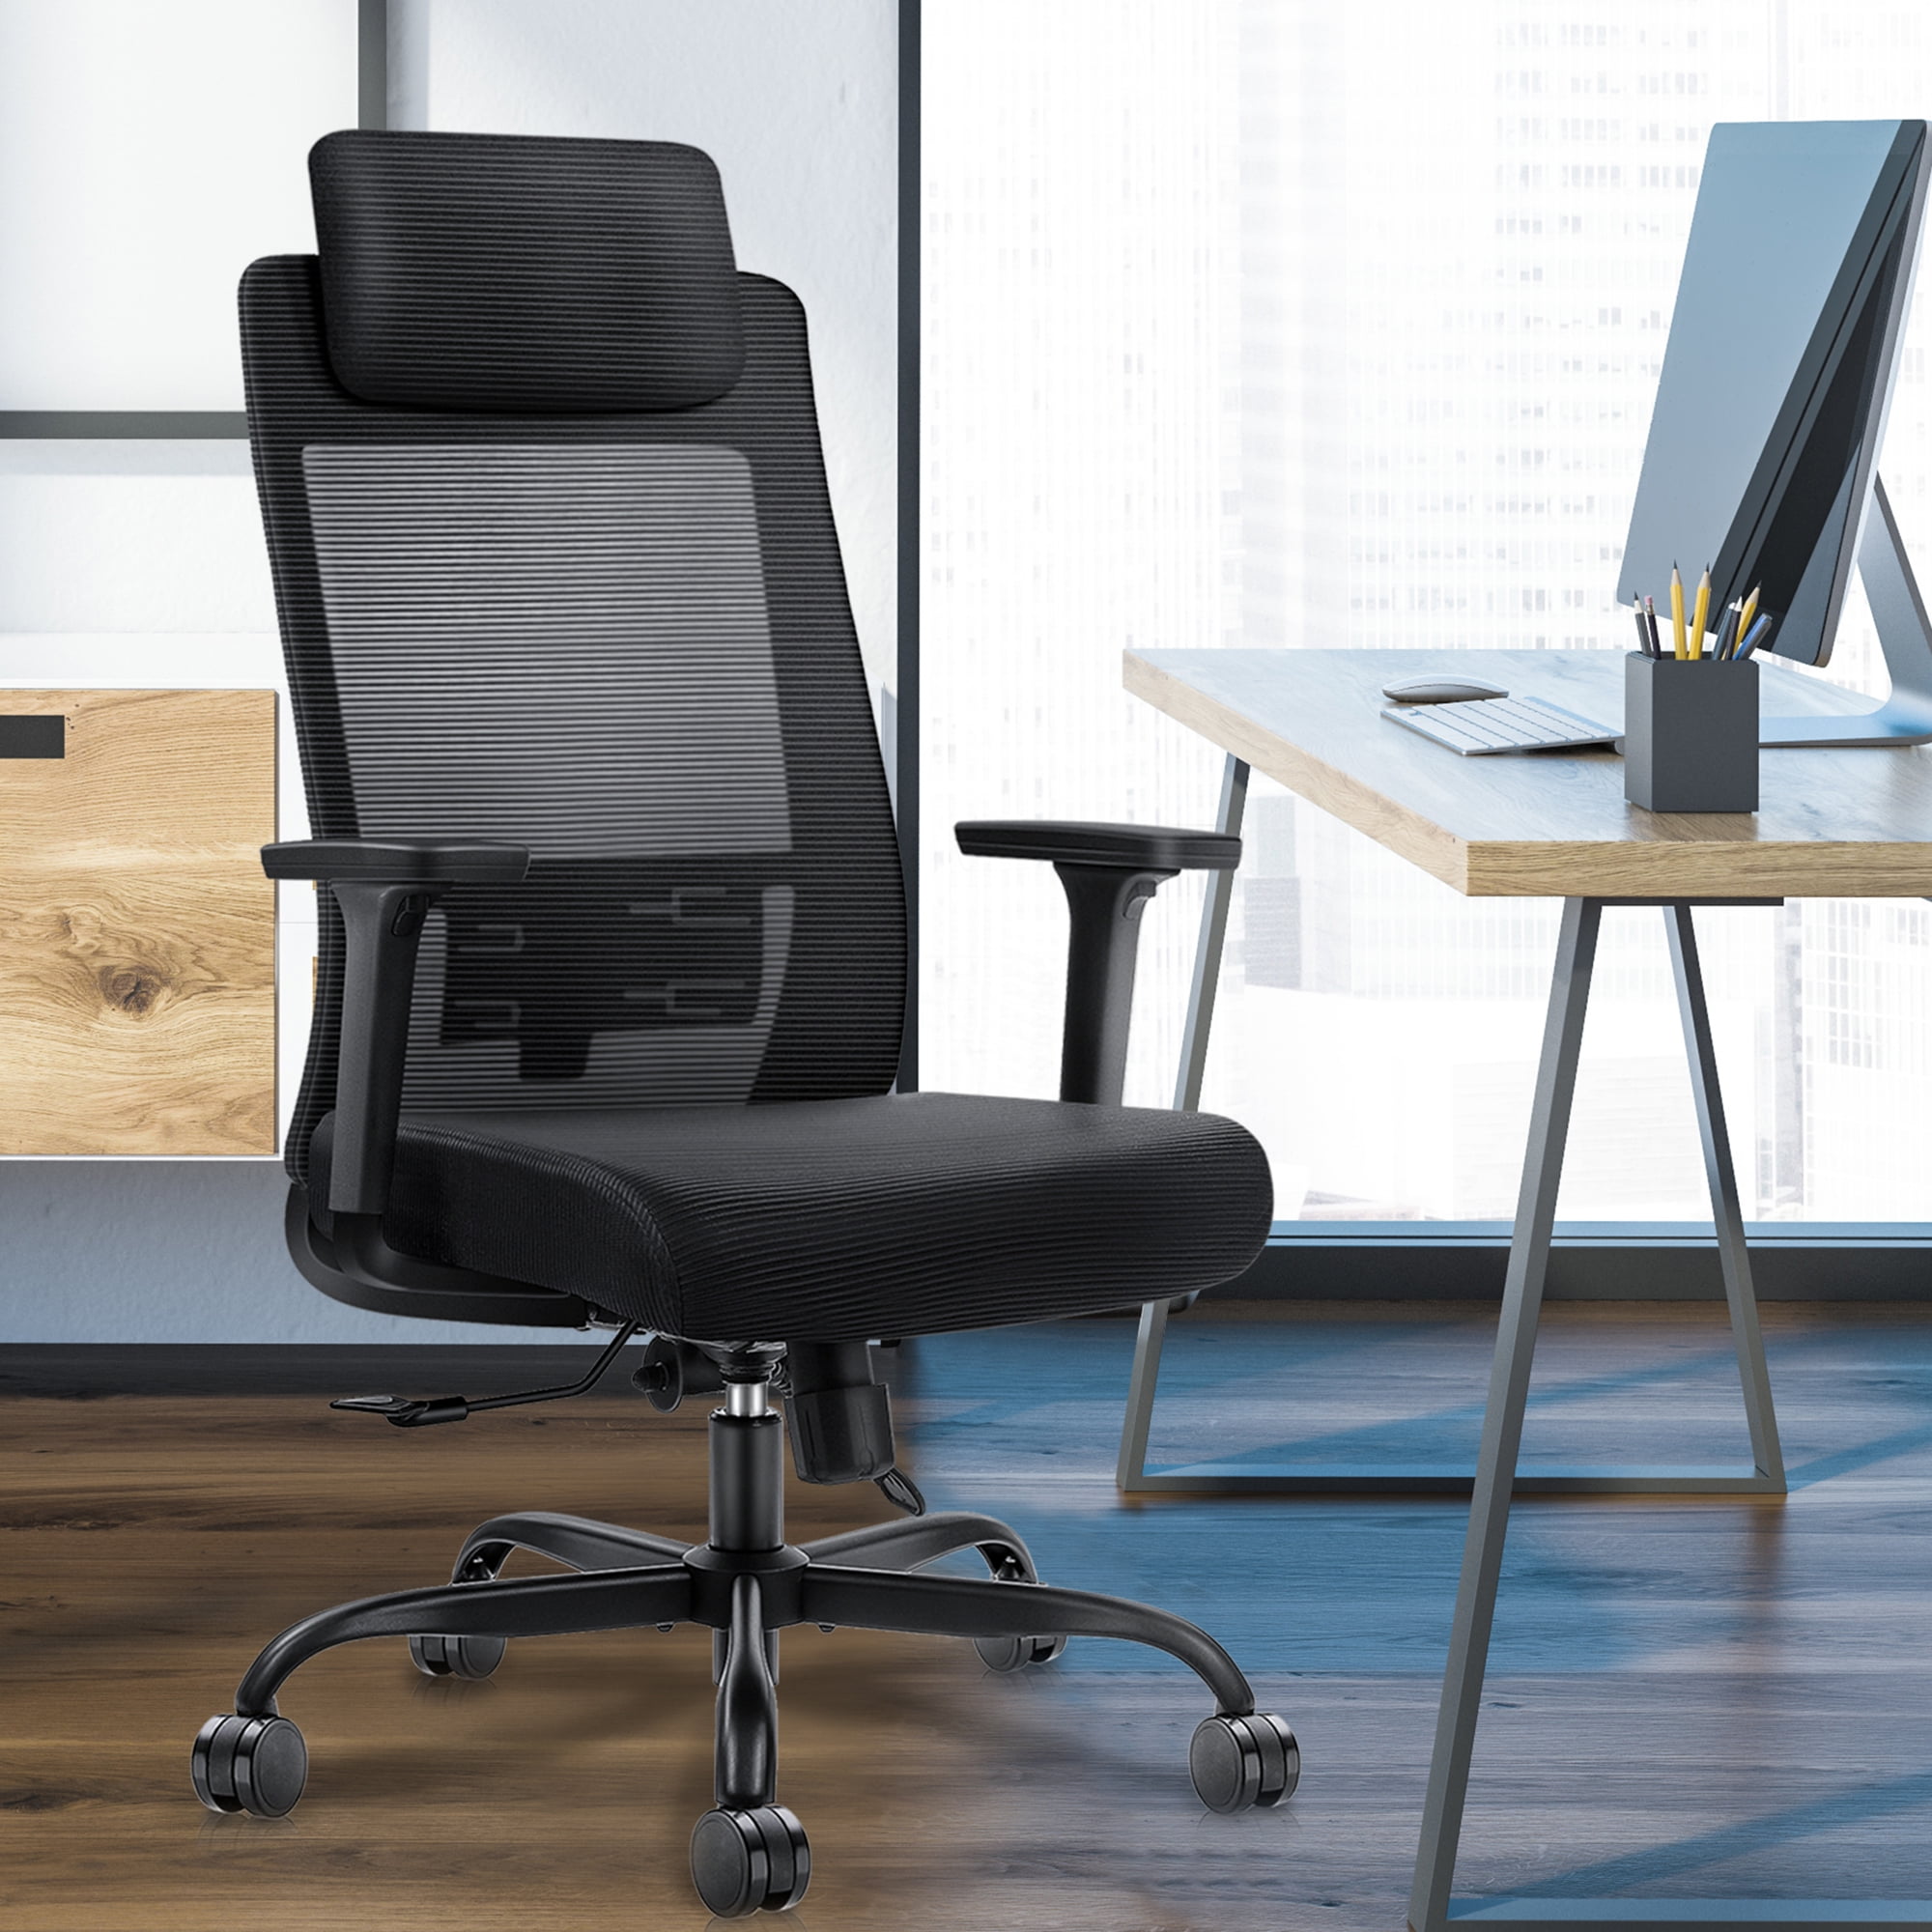 Computer Desk Chairs High Back with Lumbar Support DAVEJONES Ergonomic Office Chair 3D Adjustable Arms